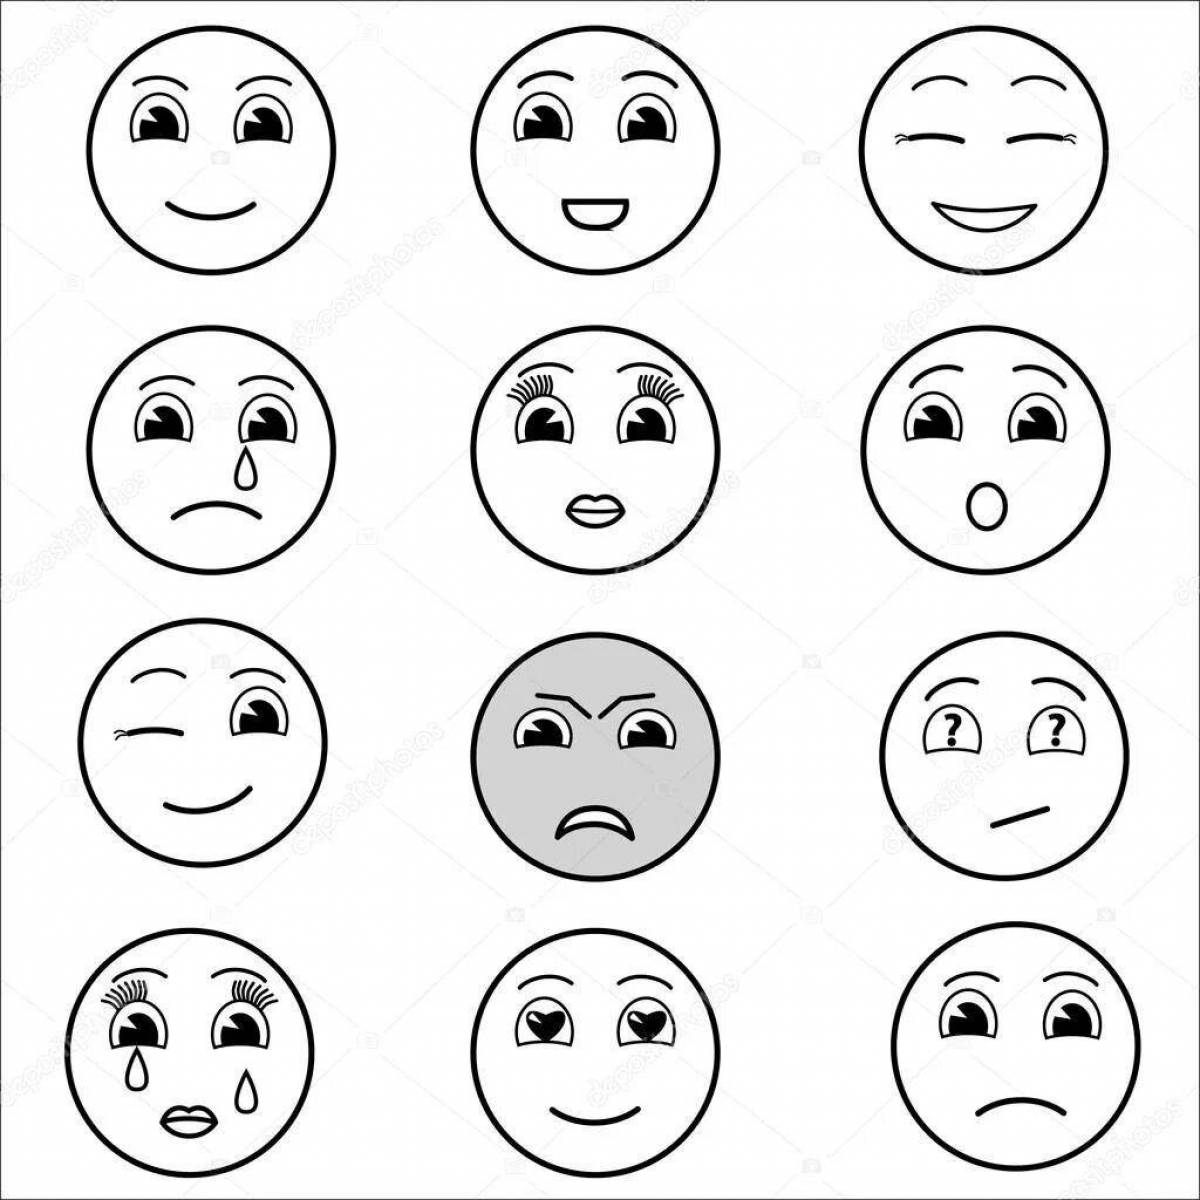 Frightened smiley coloring page